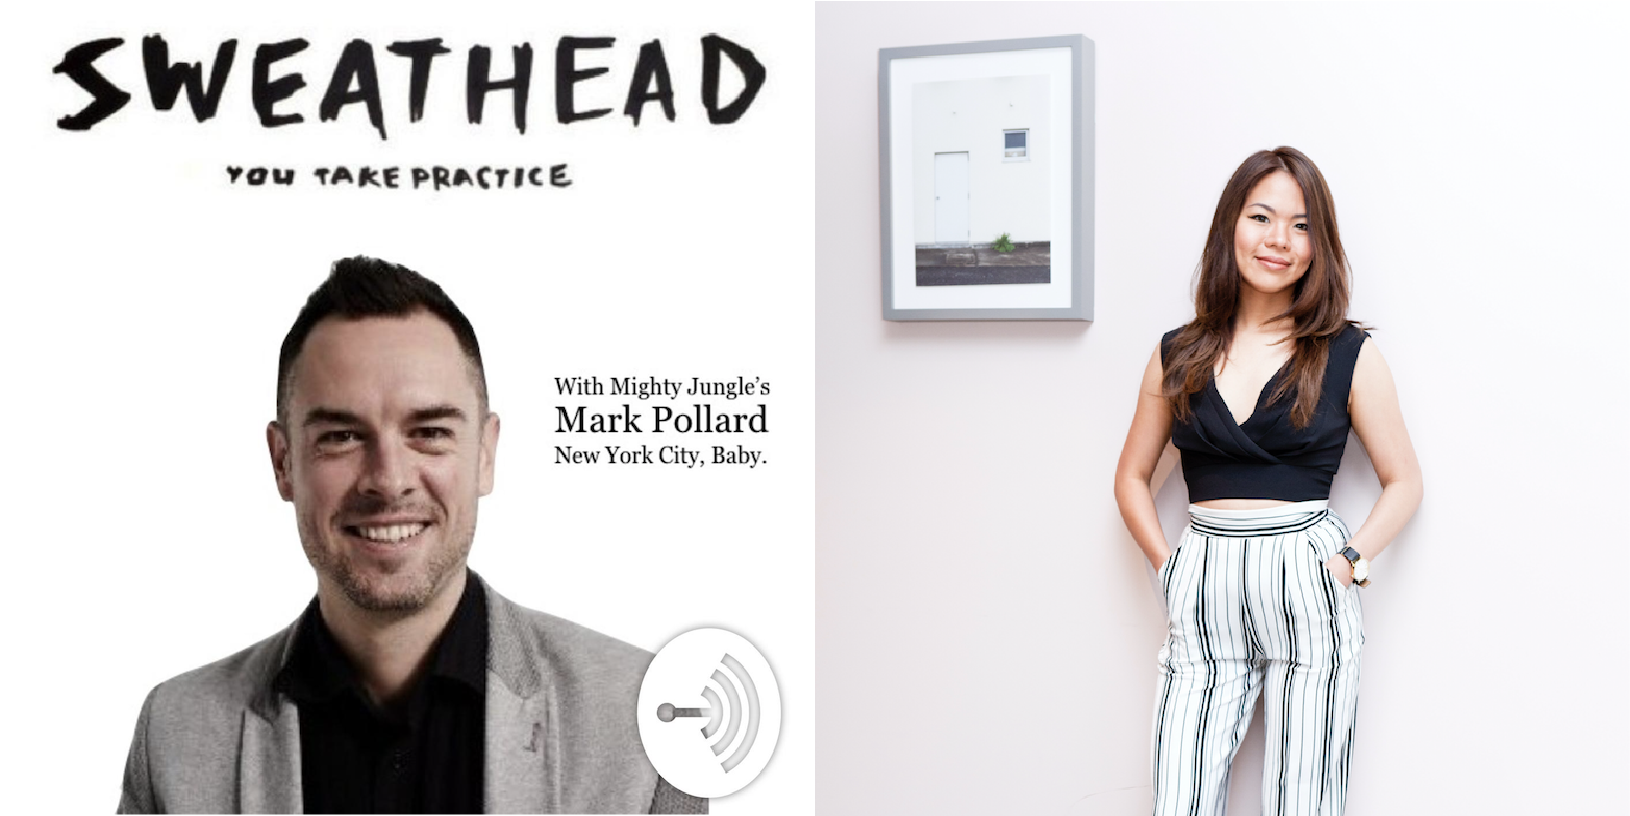 Can You Plan Happiness? | Interview on SWEATHEAD by Mark Pollard